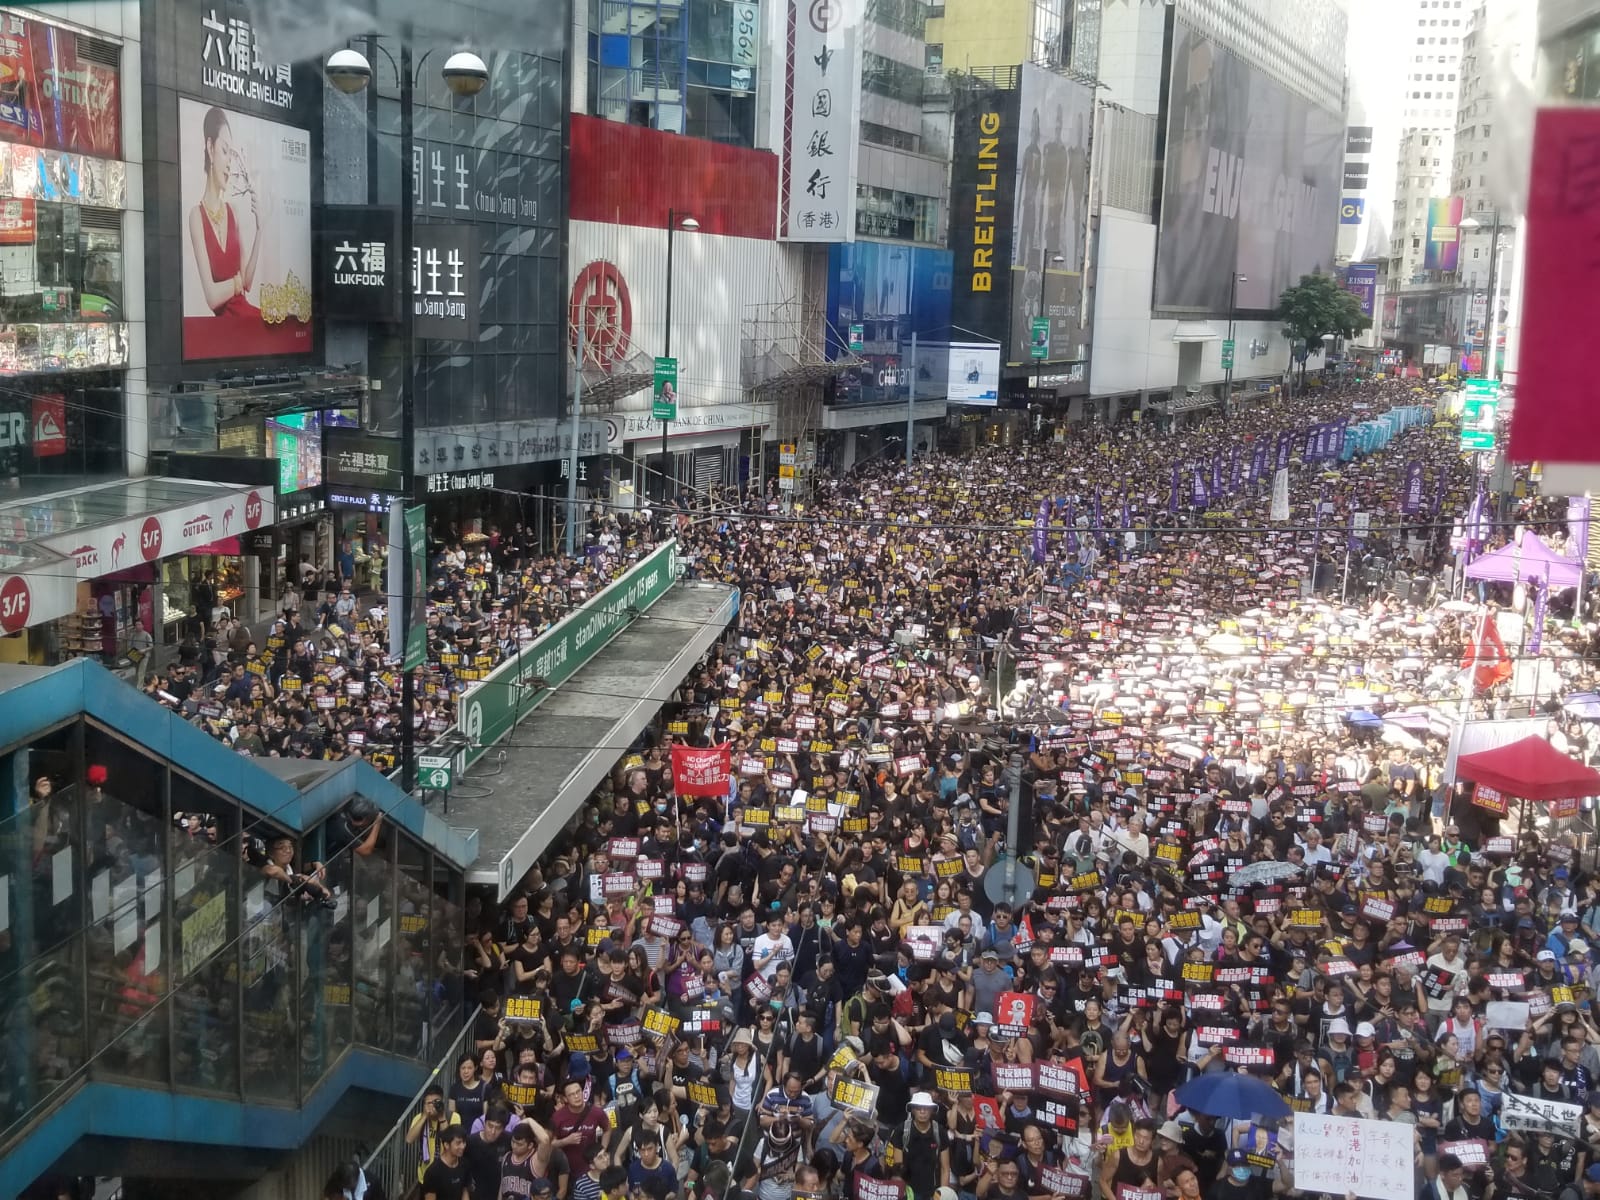 Tens of thousands take to Hong Kong’s streets in protest of controversial extradition legislation on Sunday, July 21. Photo by Vicky Wong/Coconuts Hong Kong